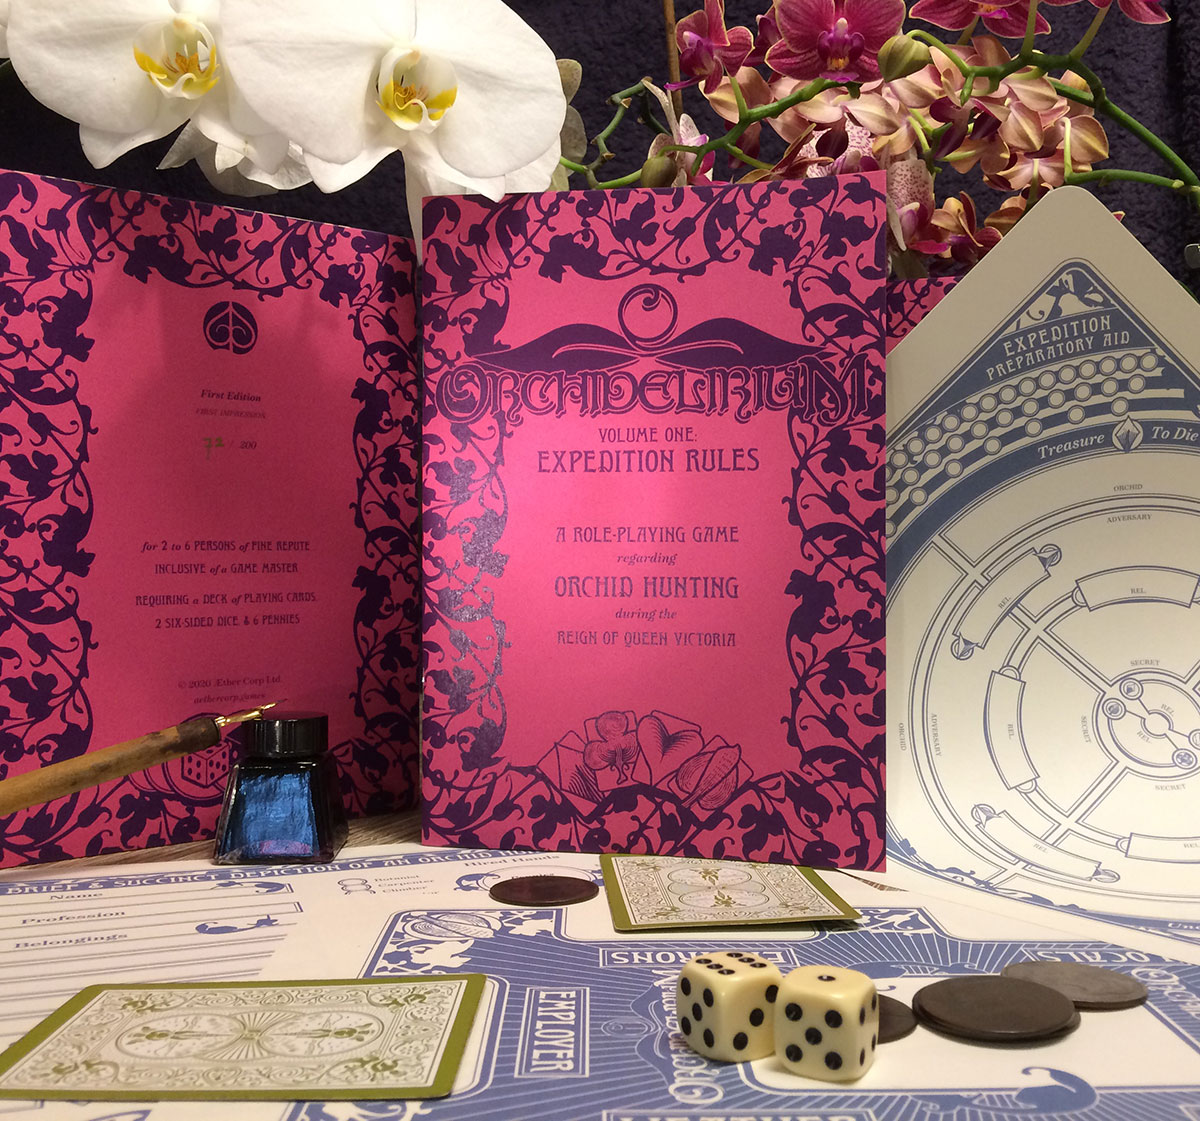 Photo of first edition zine with pink cover surrounded by orchids and print outs